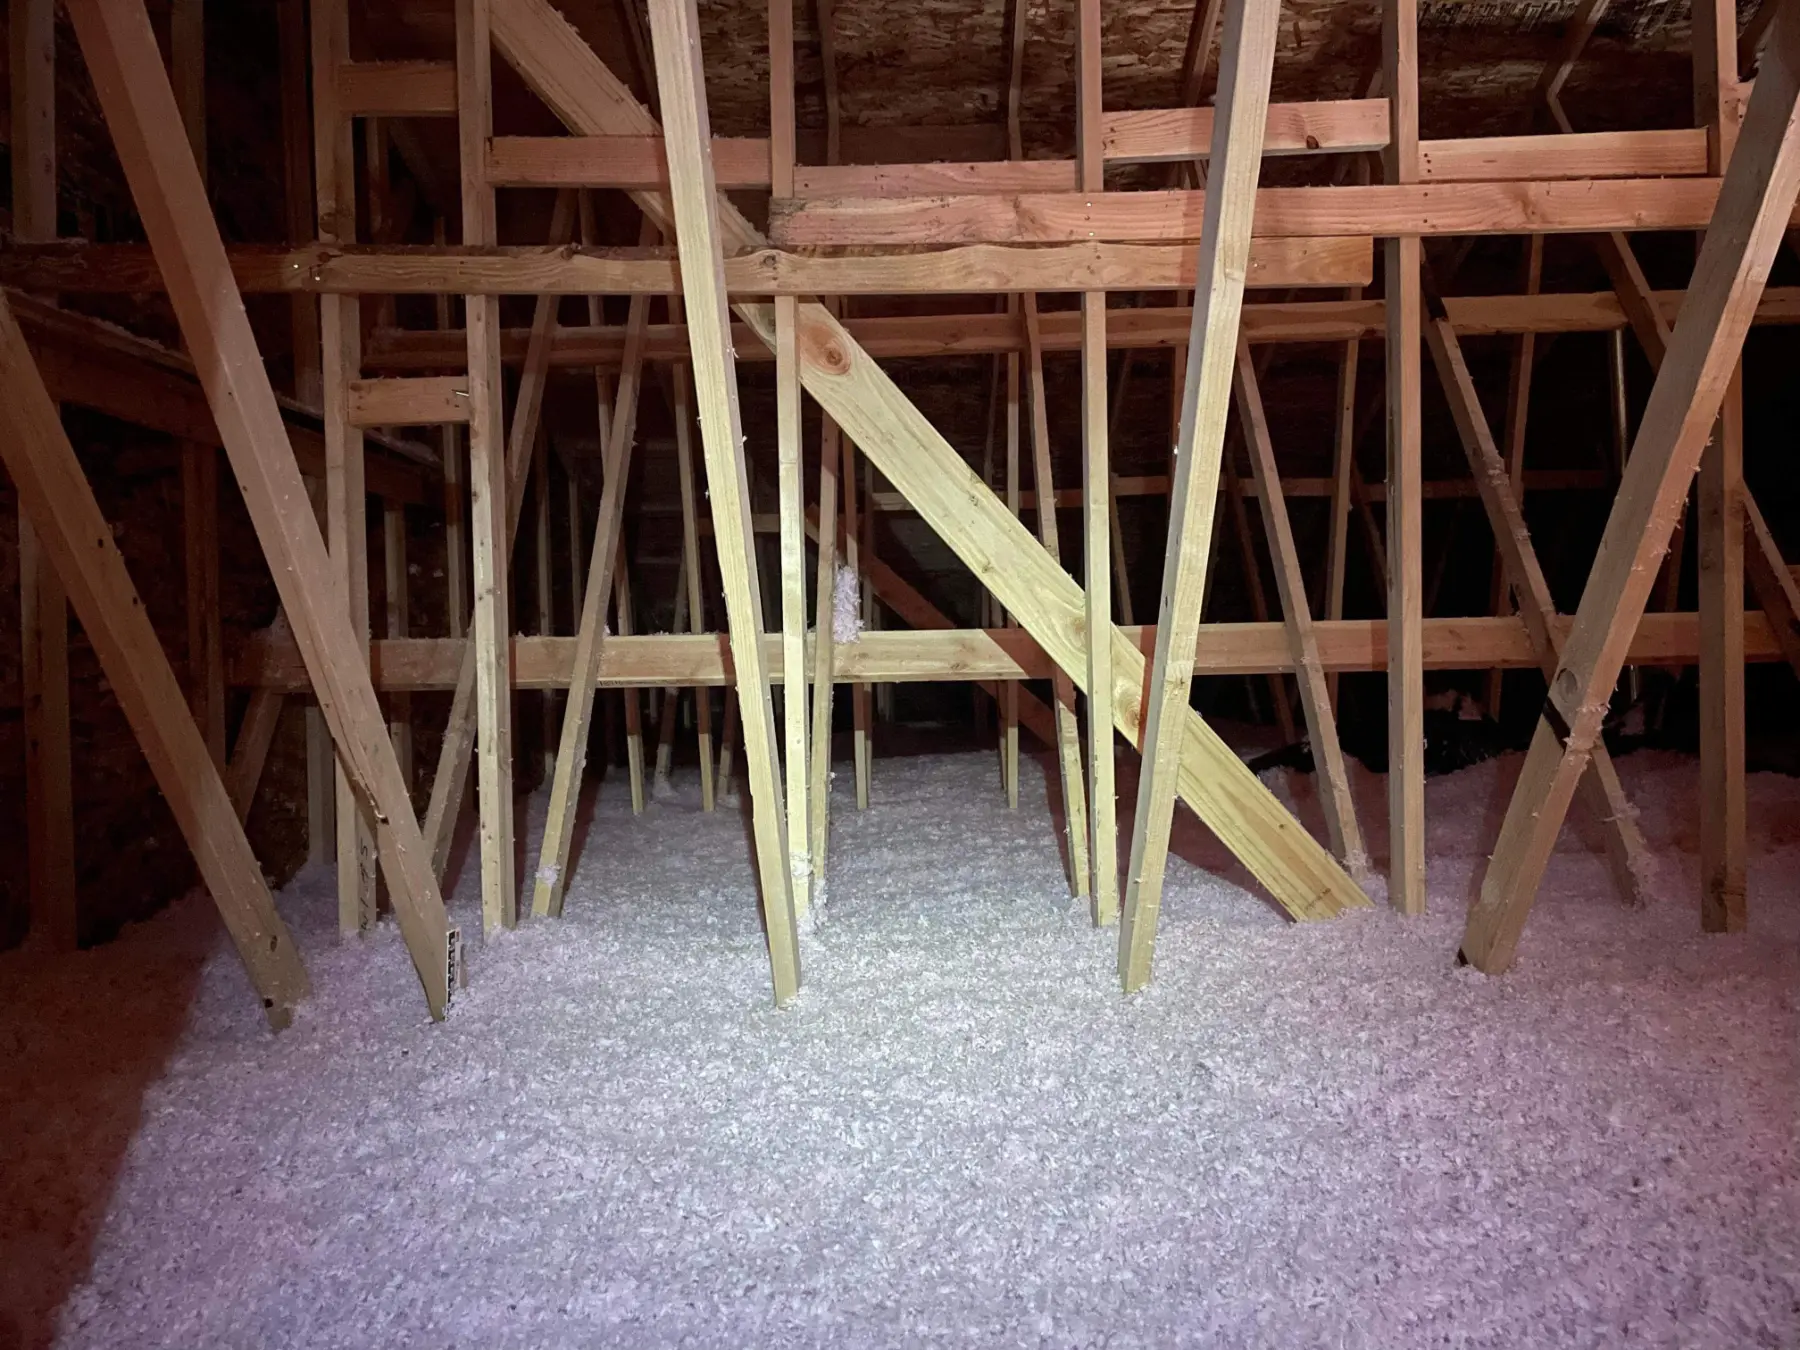 Blown insulation installed in an attic space.